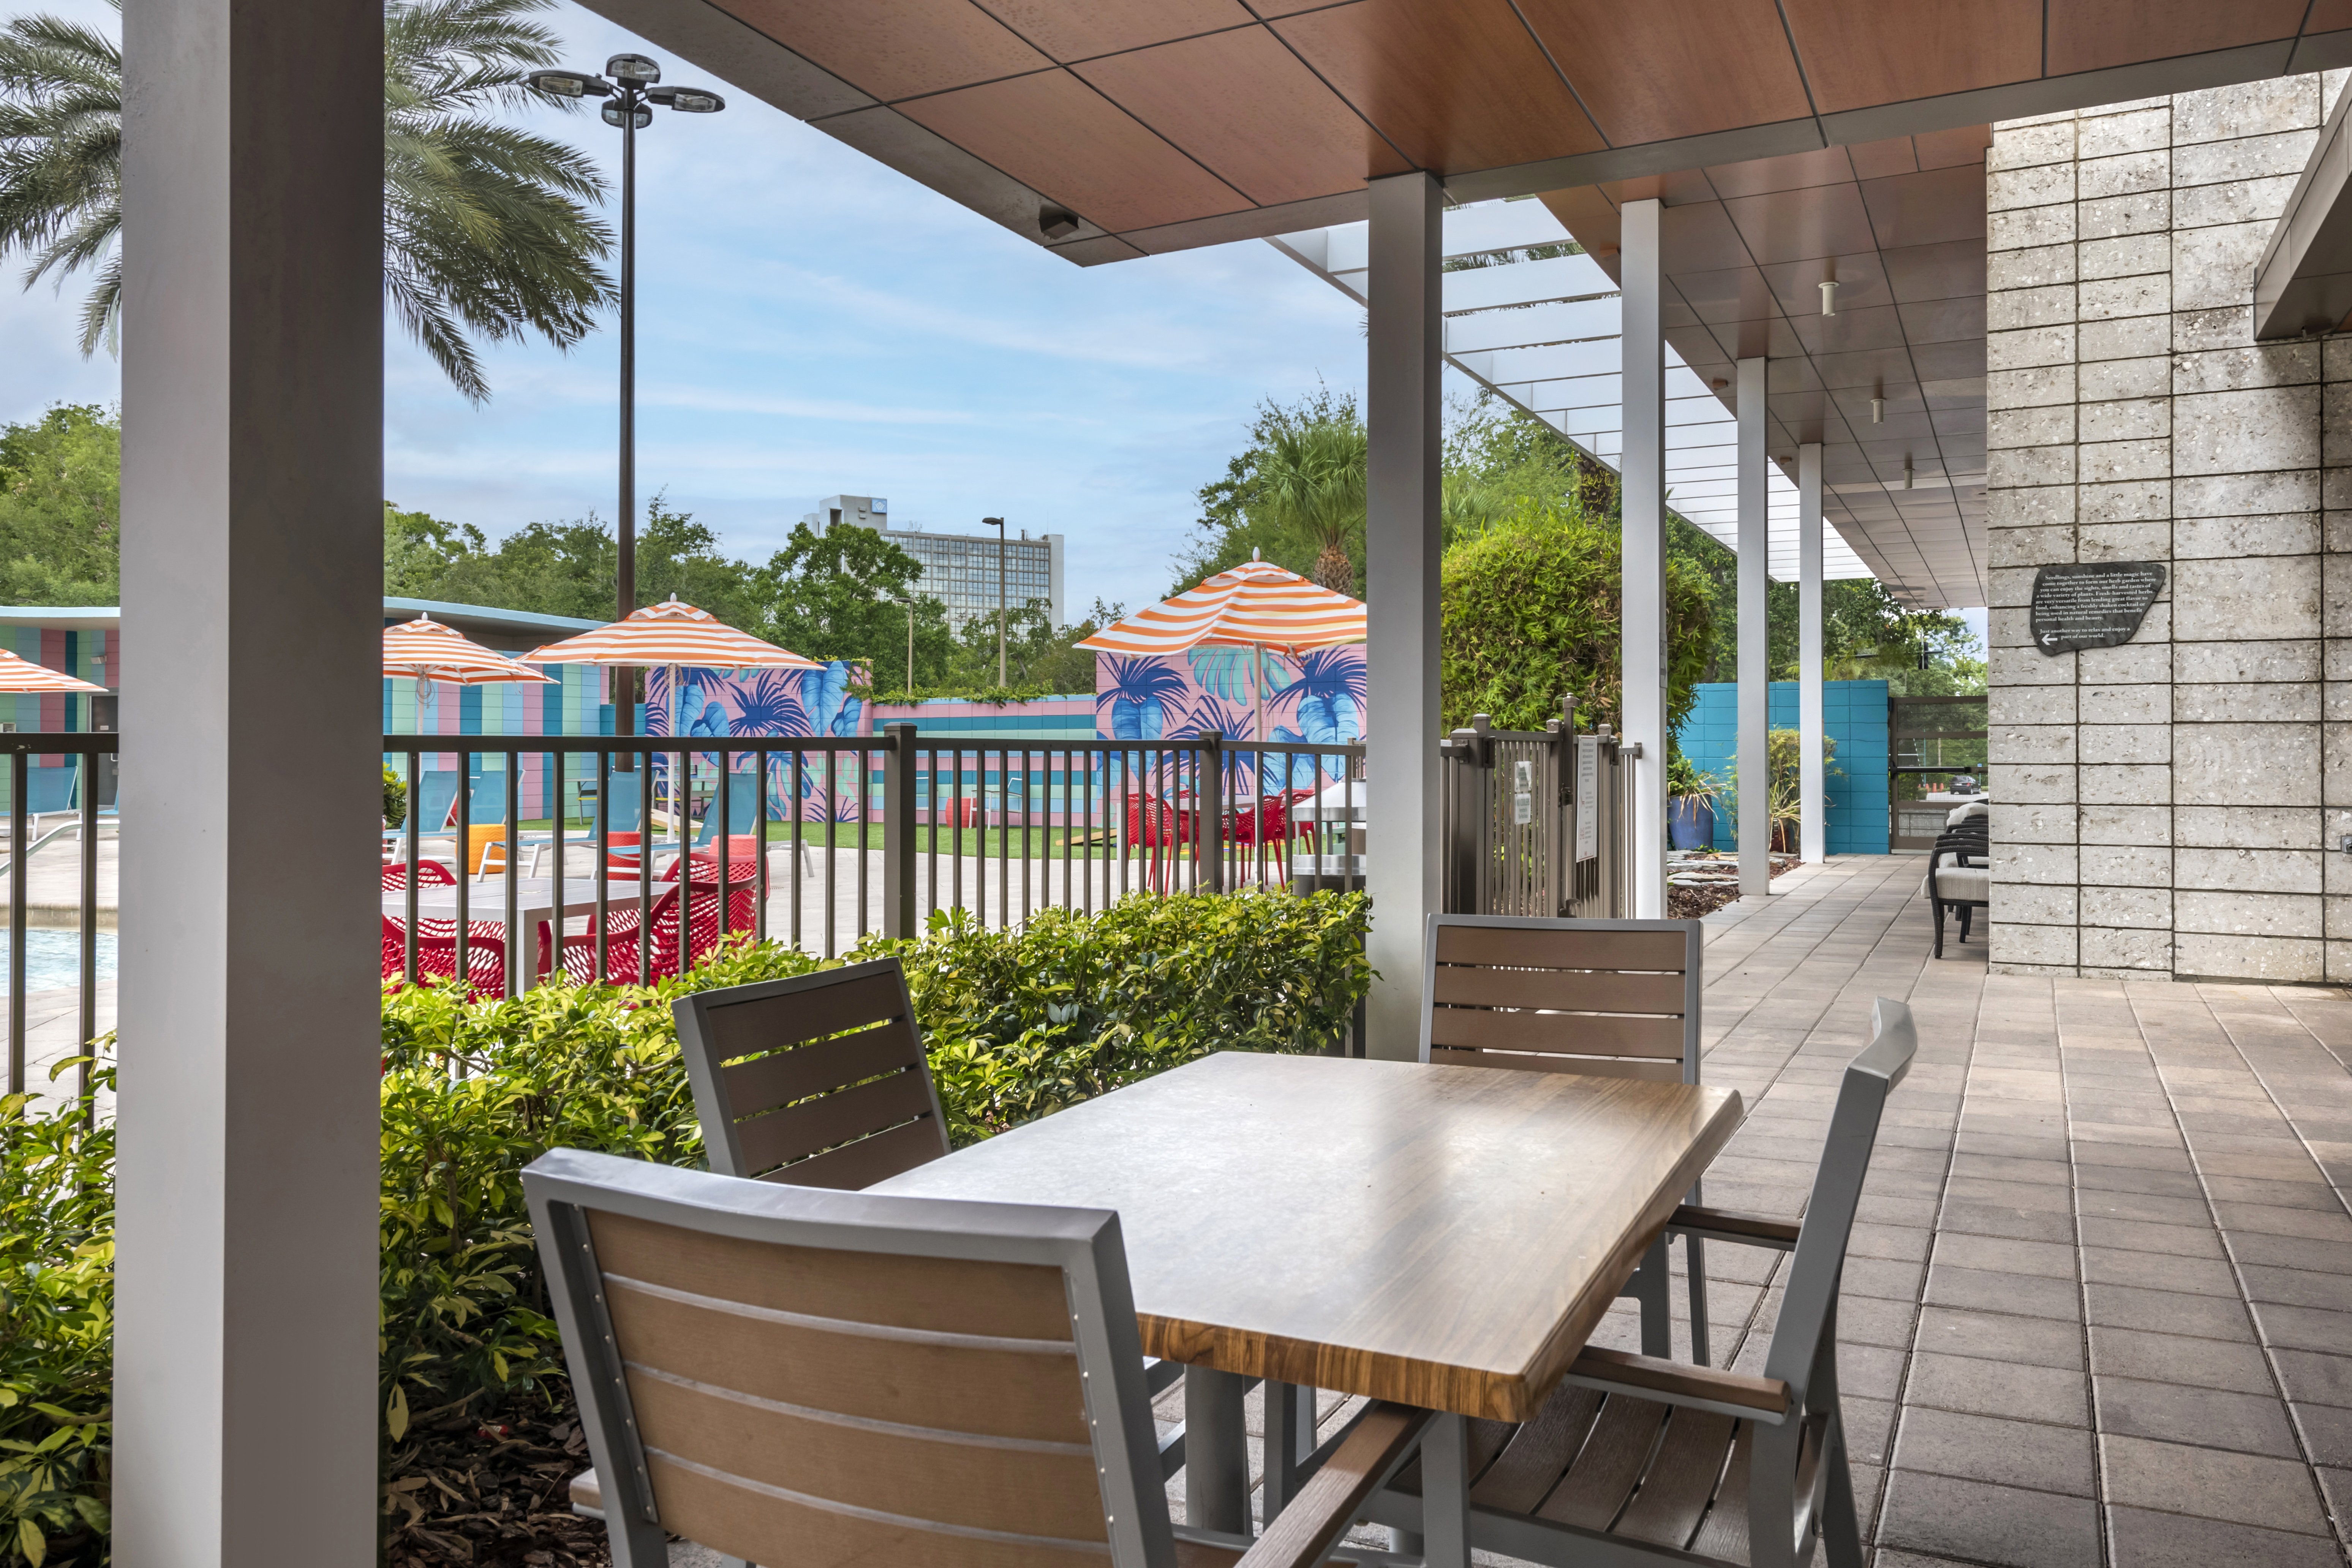 Enjoy outdoor dining on our covered patio